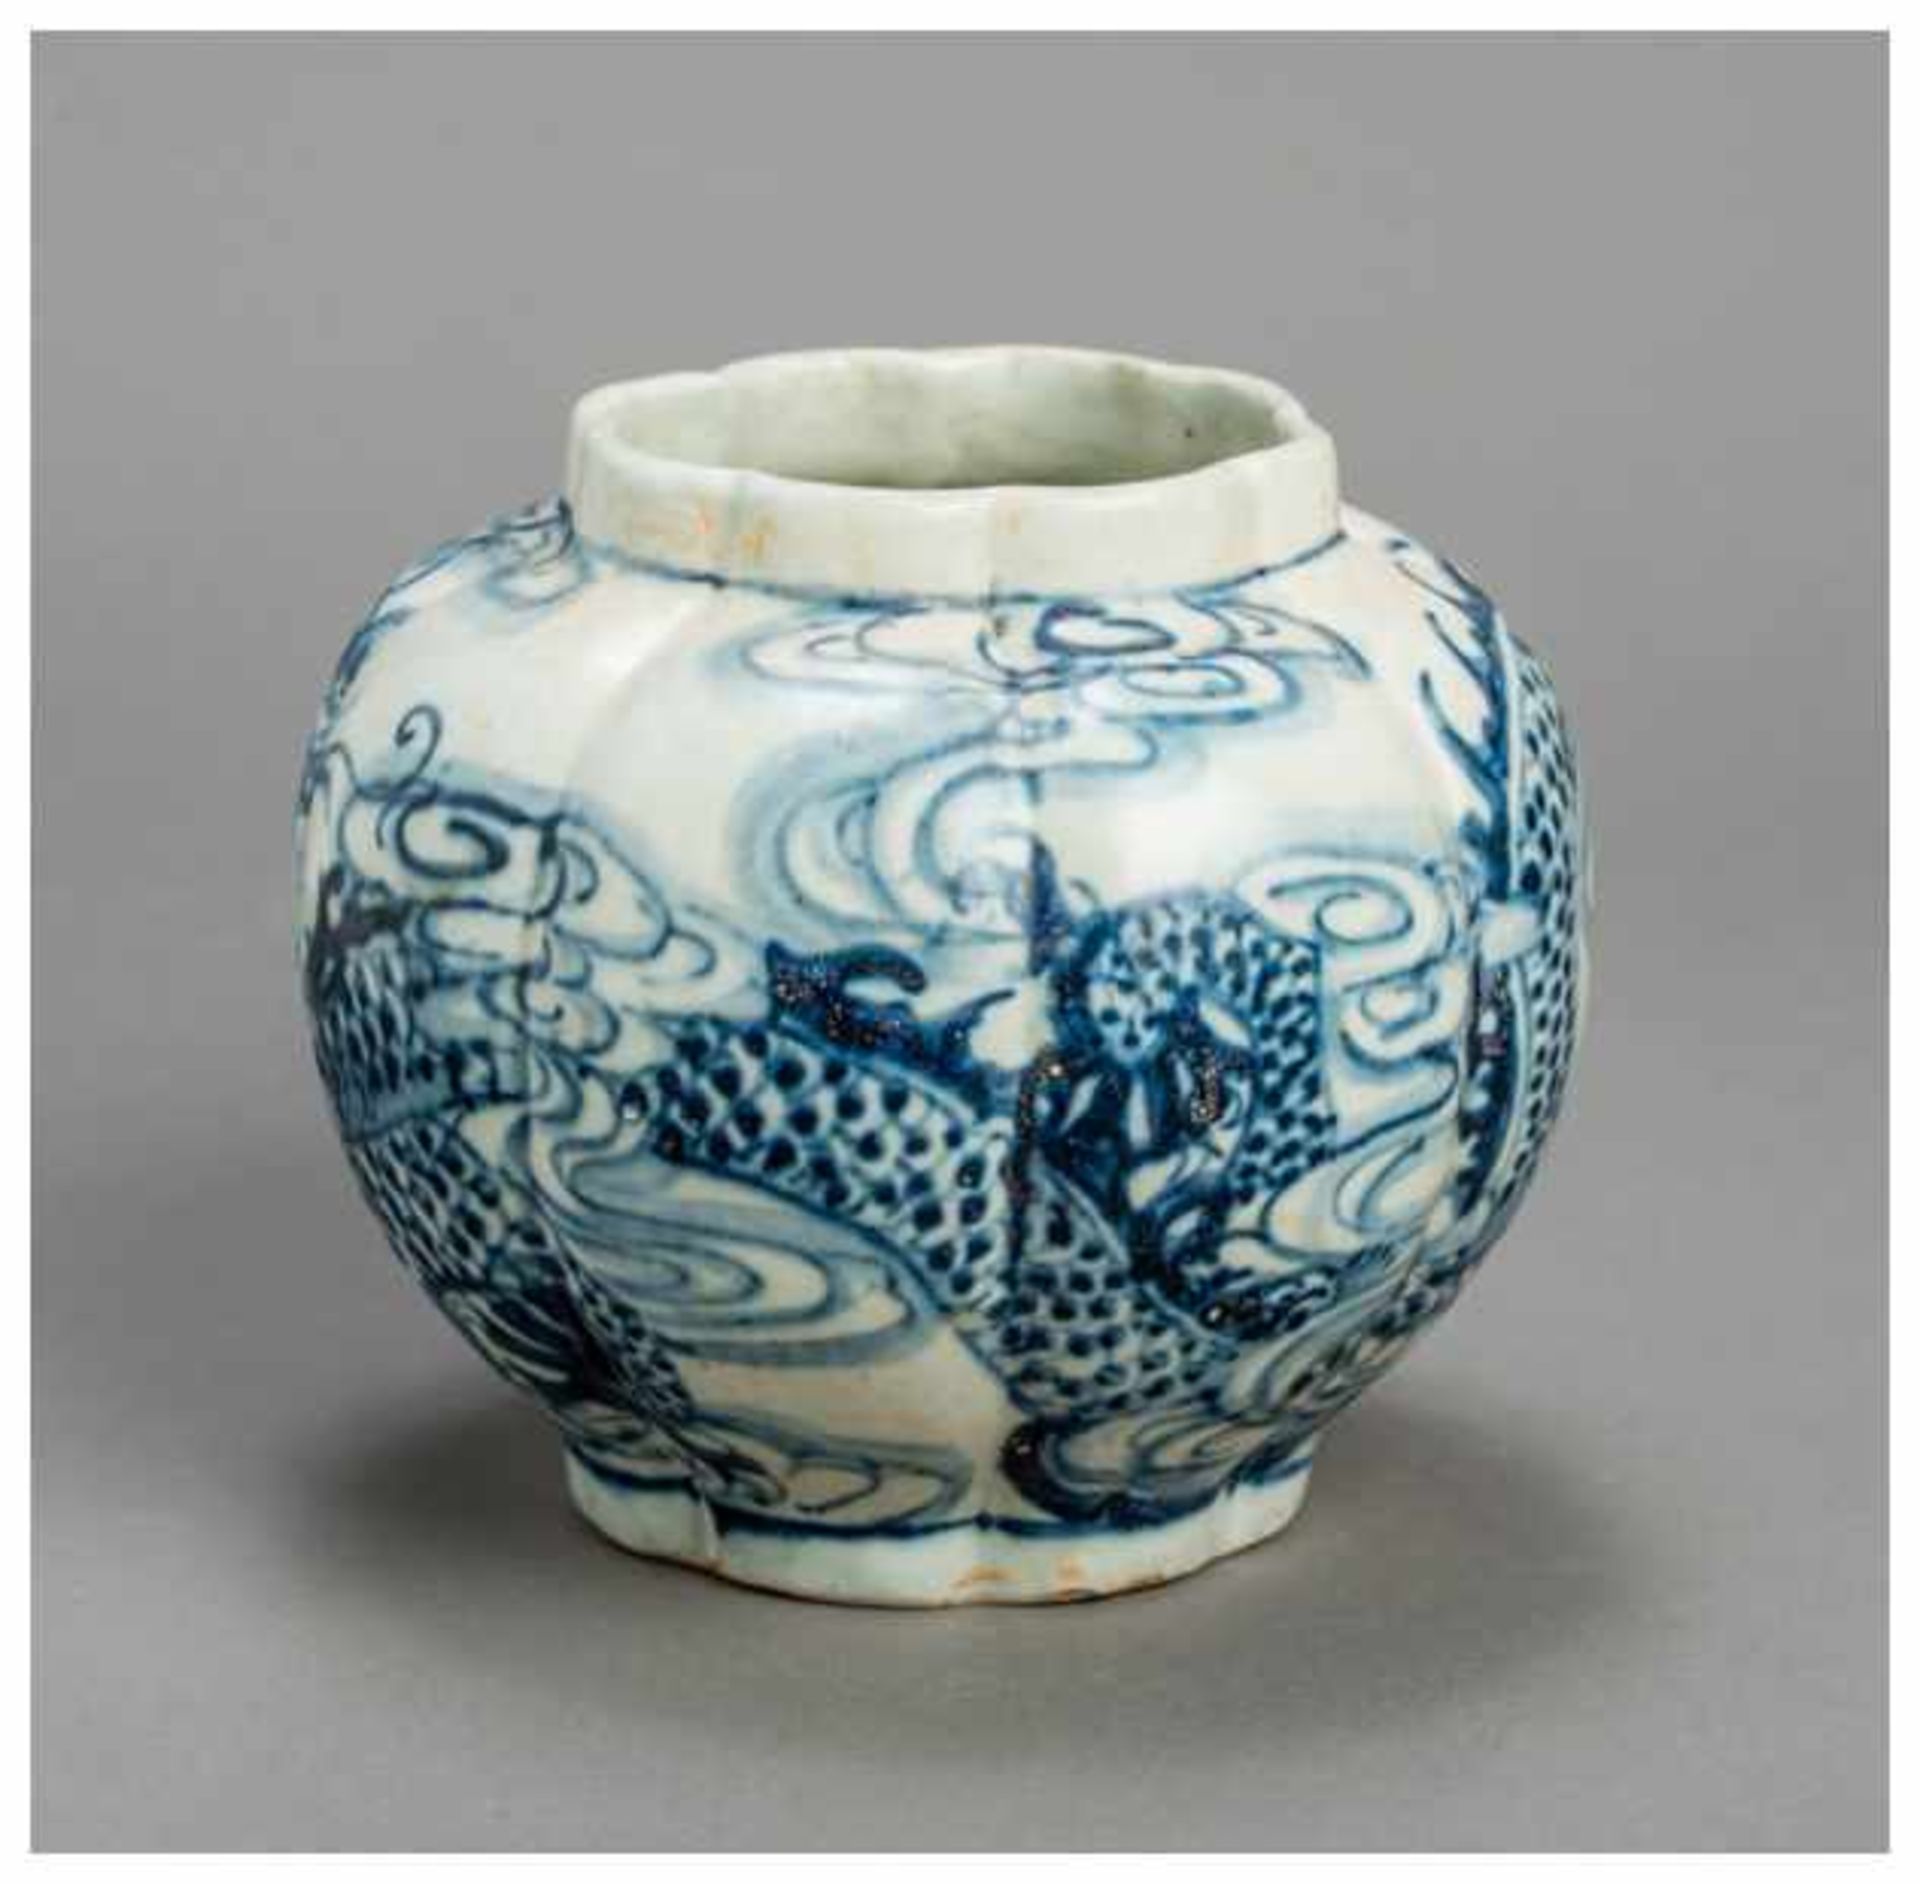 A CHINESE GLAZED STONEWARE POT VESSEL WITH DRAGON Glazed stoneware. China, late Ming dynasty to - Image 2 of 6